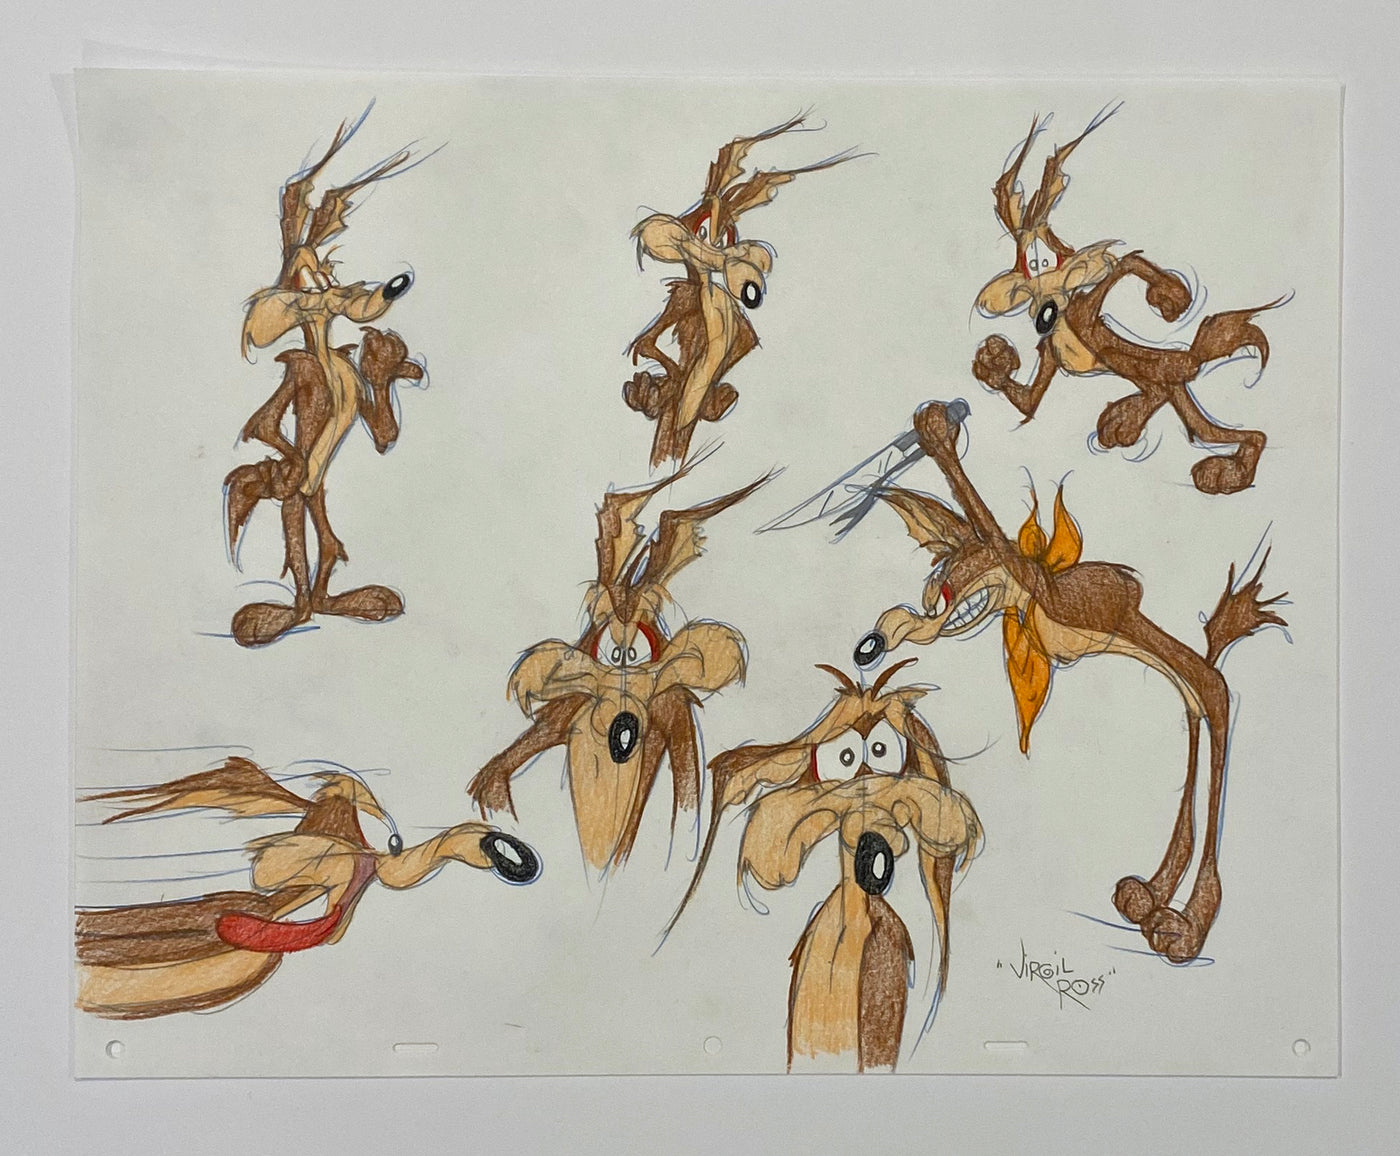 Original Warner Brothers Virgil Ross Model Sheet Animation Drawing featuring Wile E. Coyote